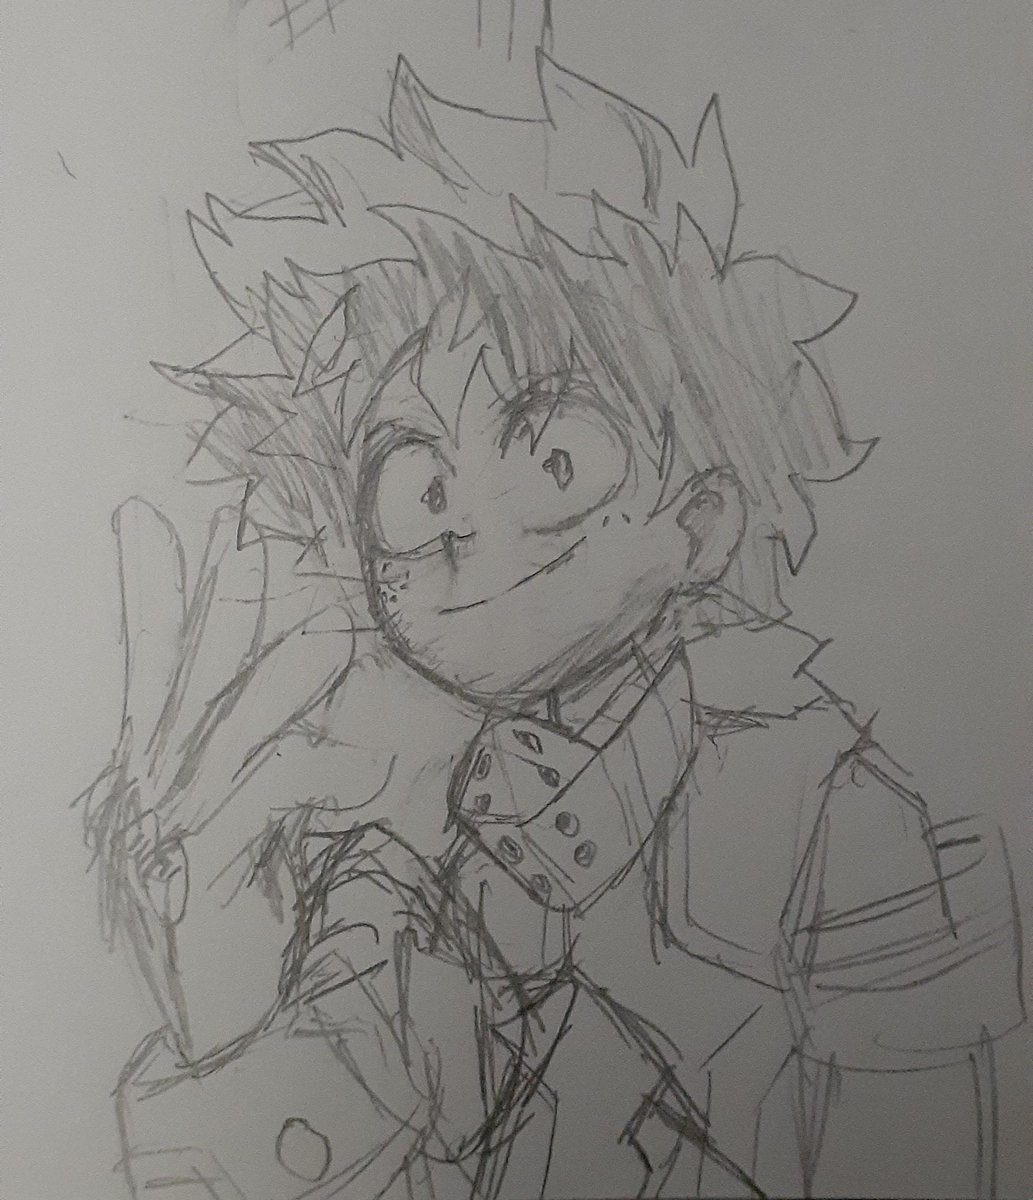 found some old mha sketches from like 2019 and wow 